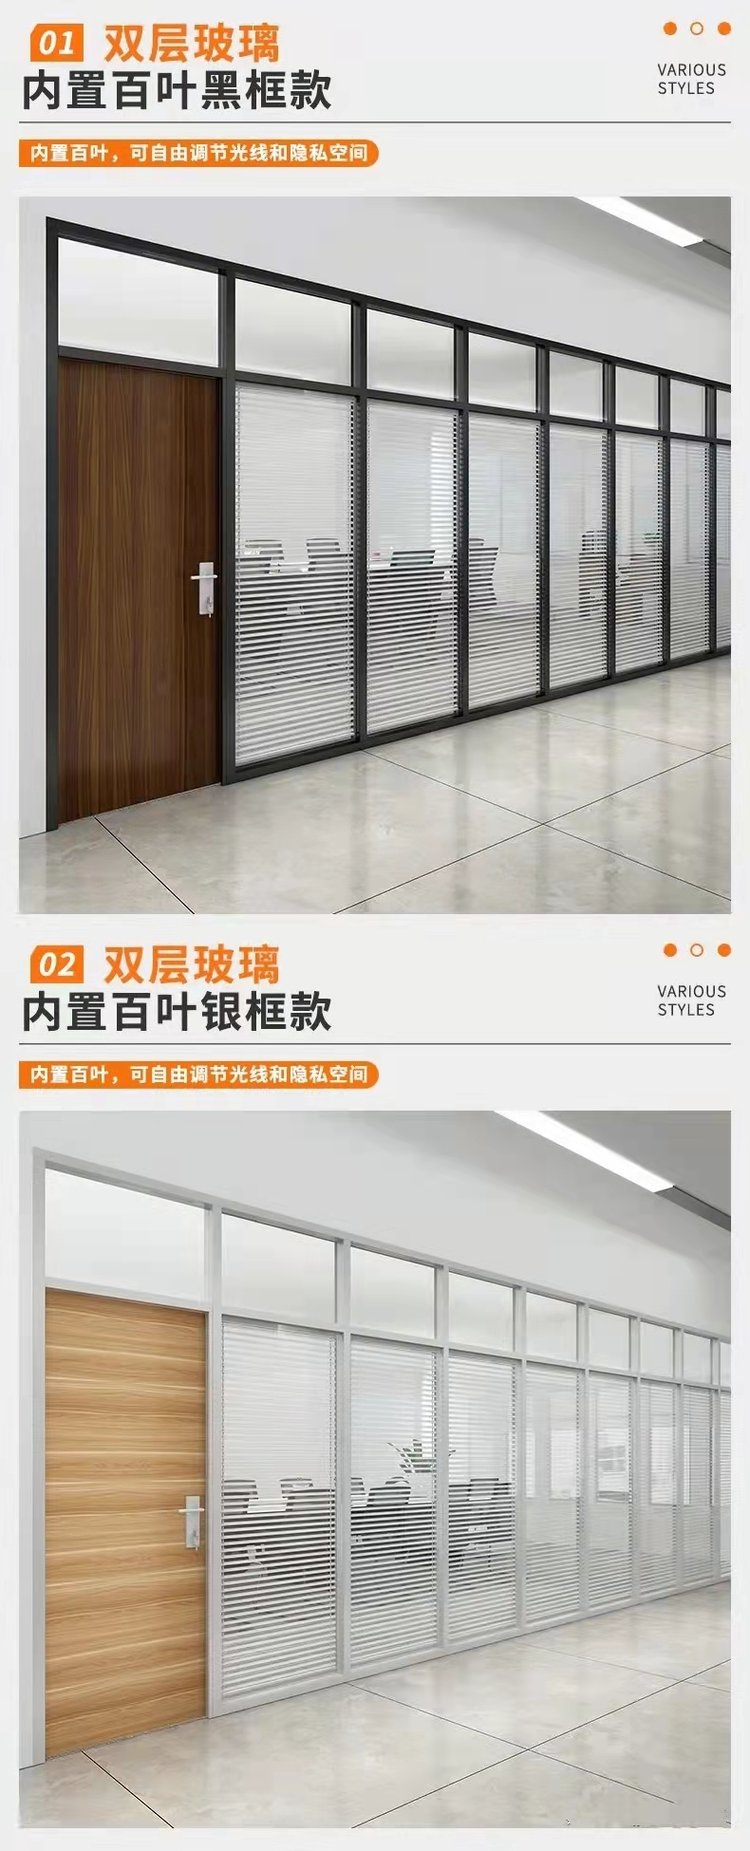 Wudaokou Glass Partition Installation Partition Wall Removal Putty Scraping Light Steel Keel Wall